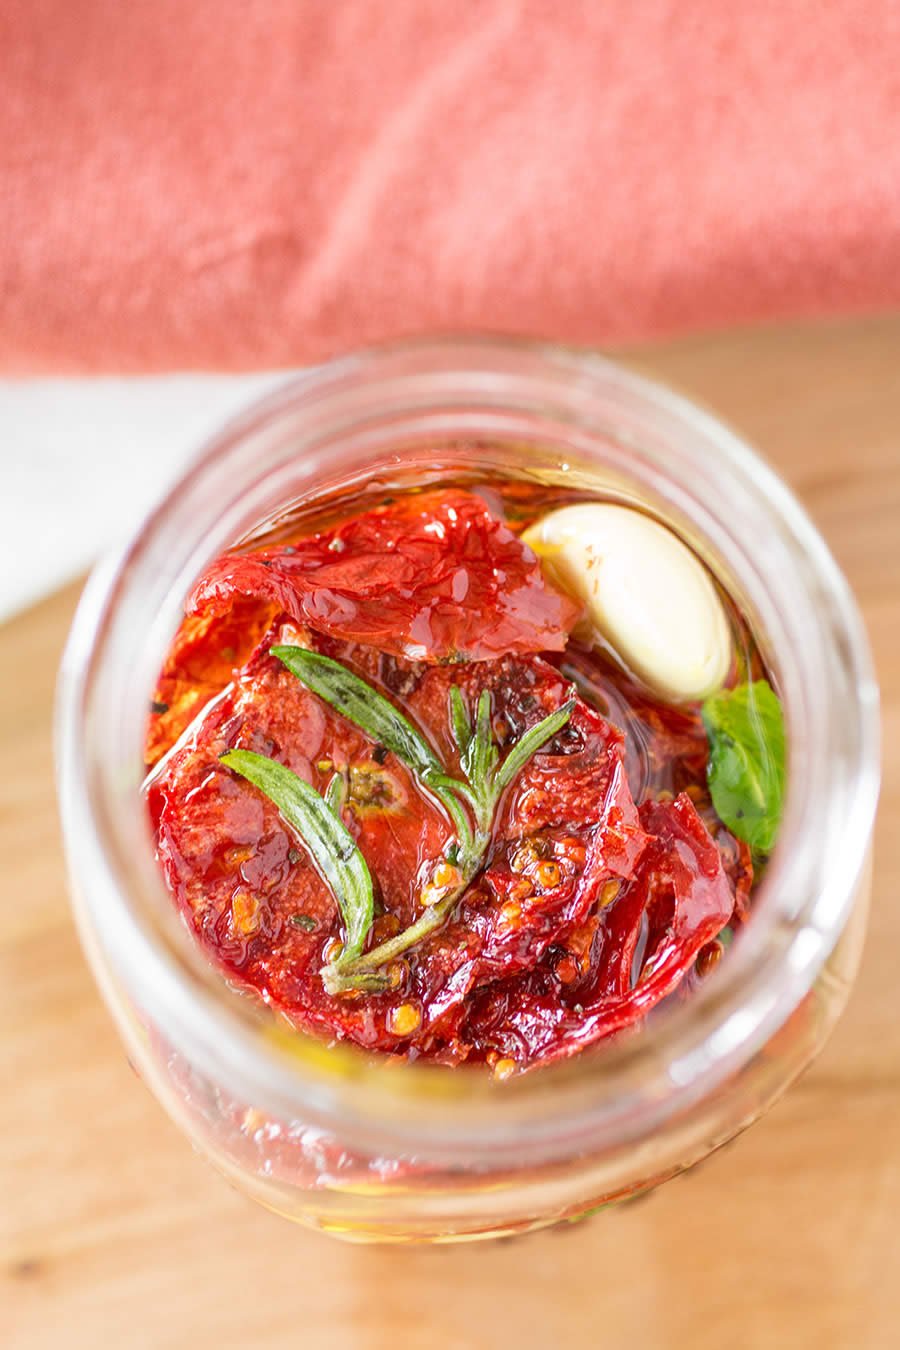 How to Make Sun Dried Tomatoes - with a Dehydrator